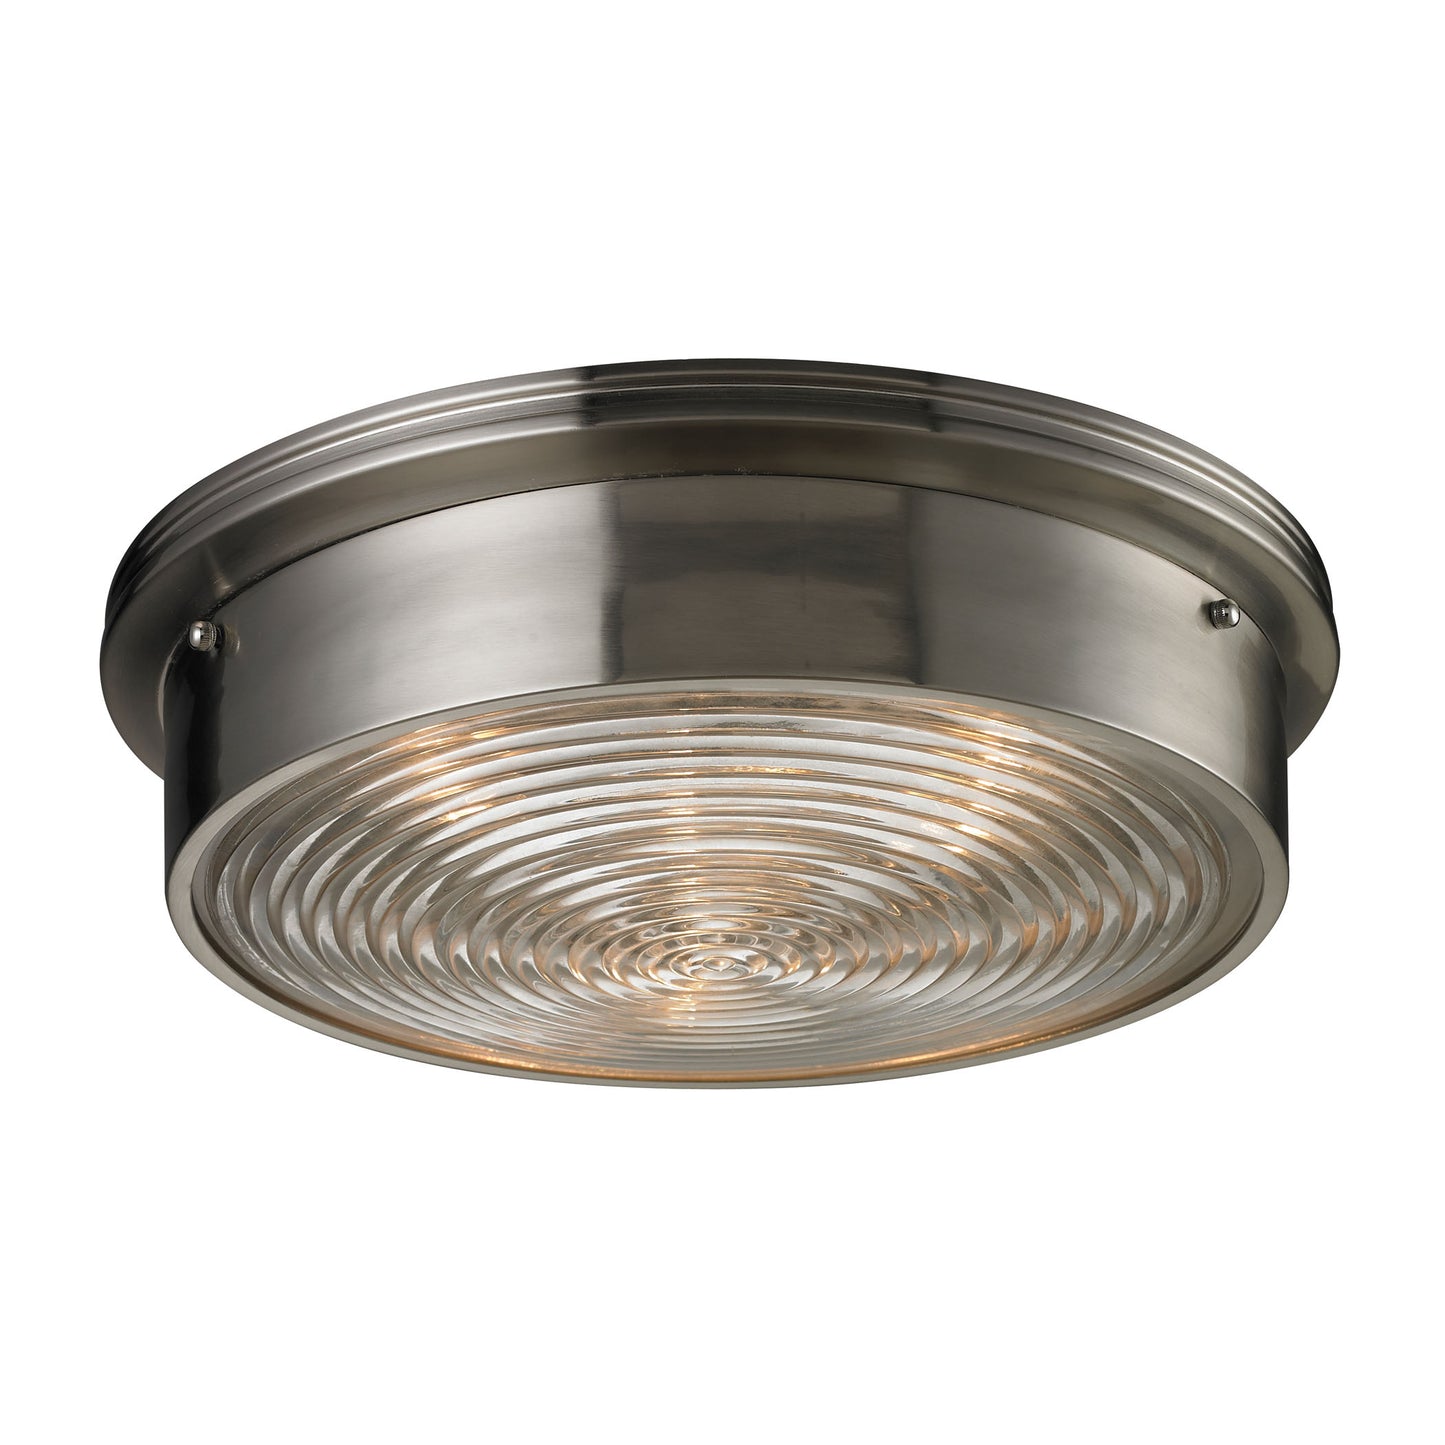 ELK Lighting 11463/3 - Chadwick 15" Wide 3-Light Flush Mount in Brushed Nickel with Diffuser